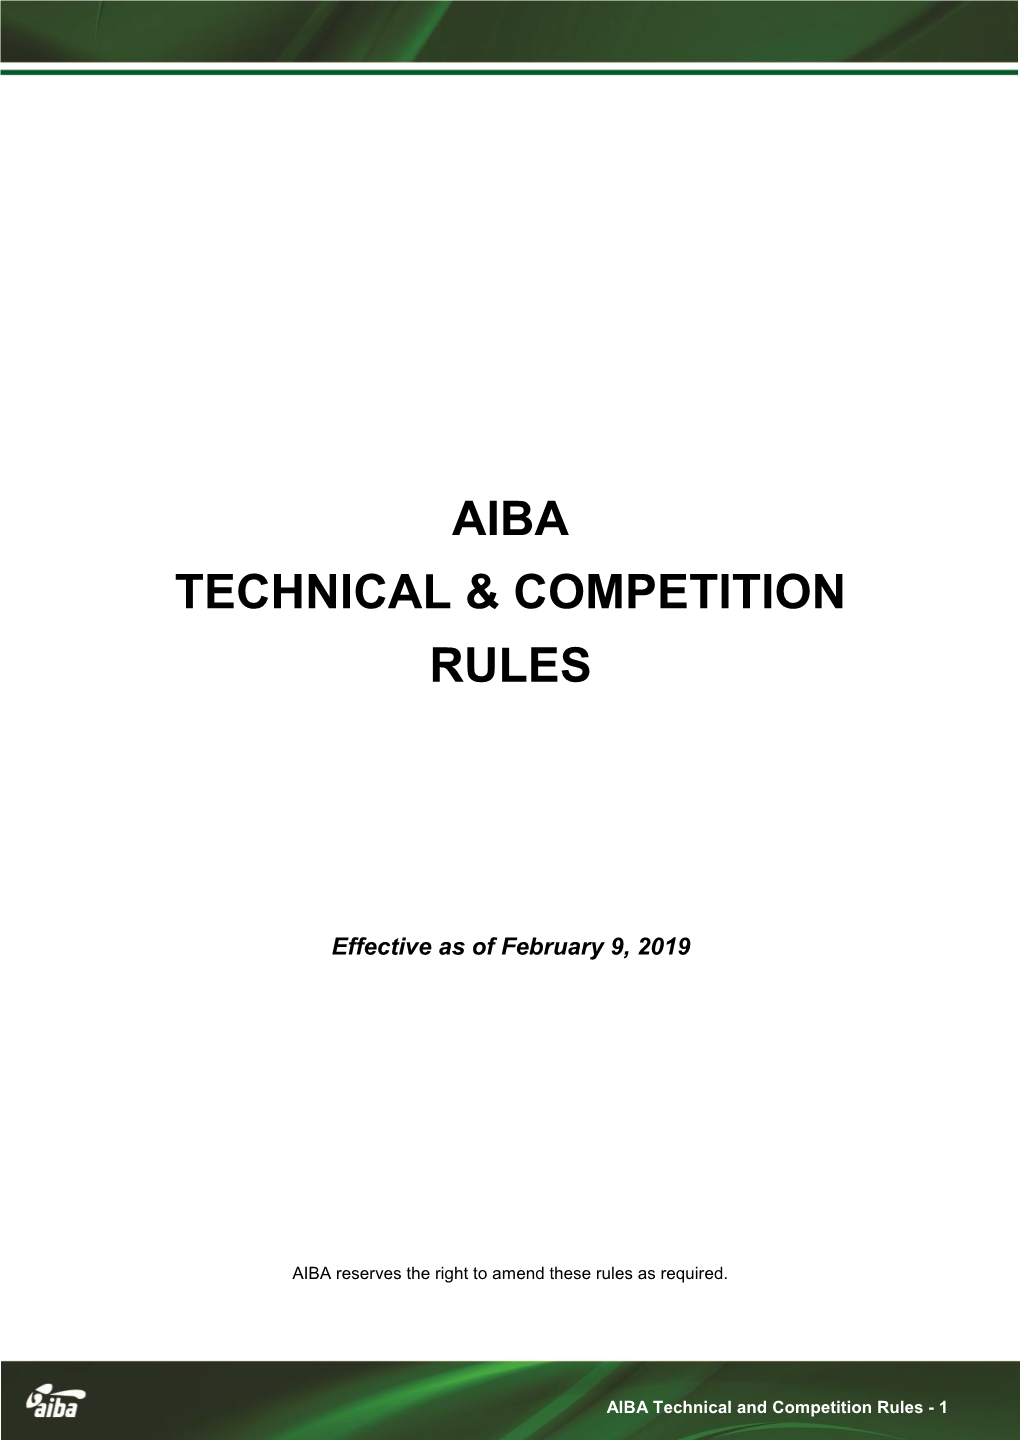 Aiba Technical & Competition Rules